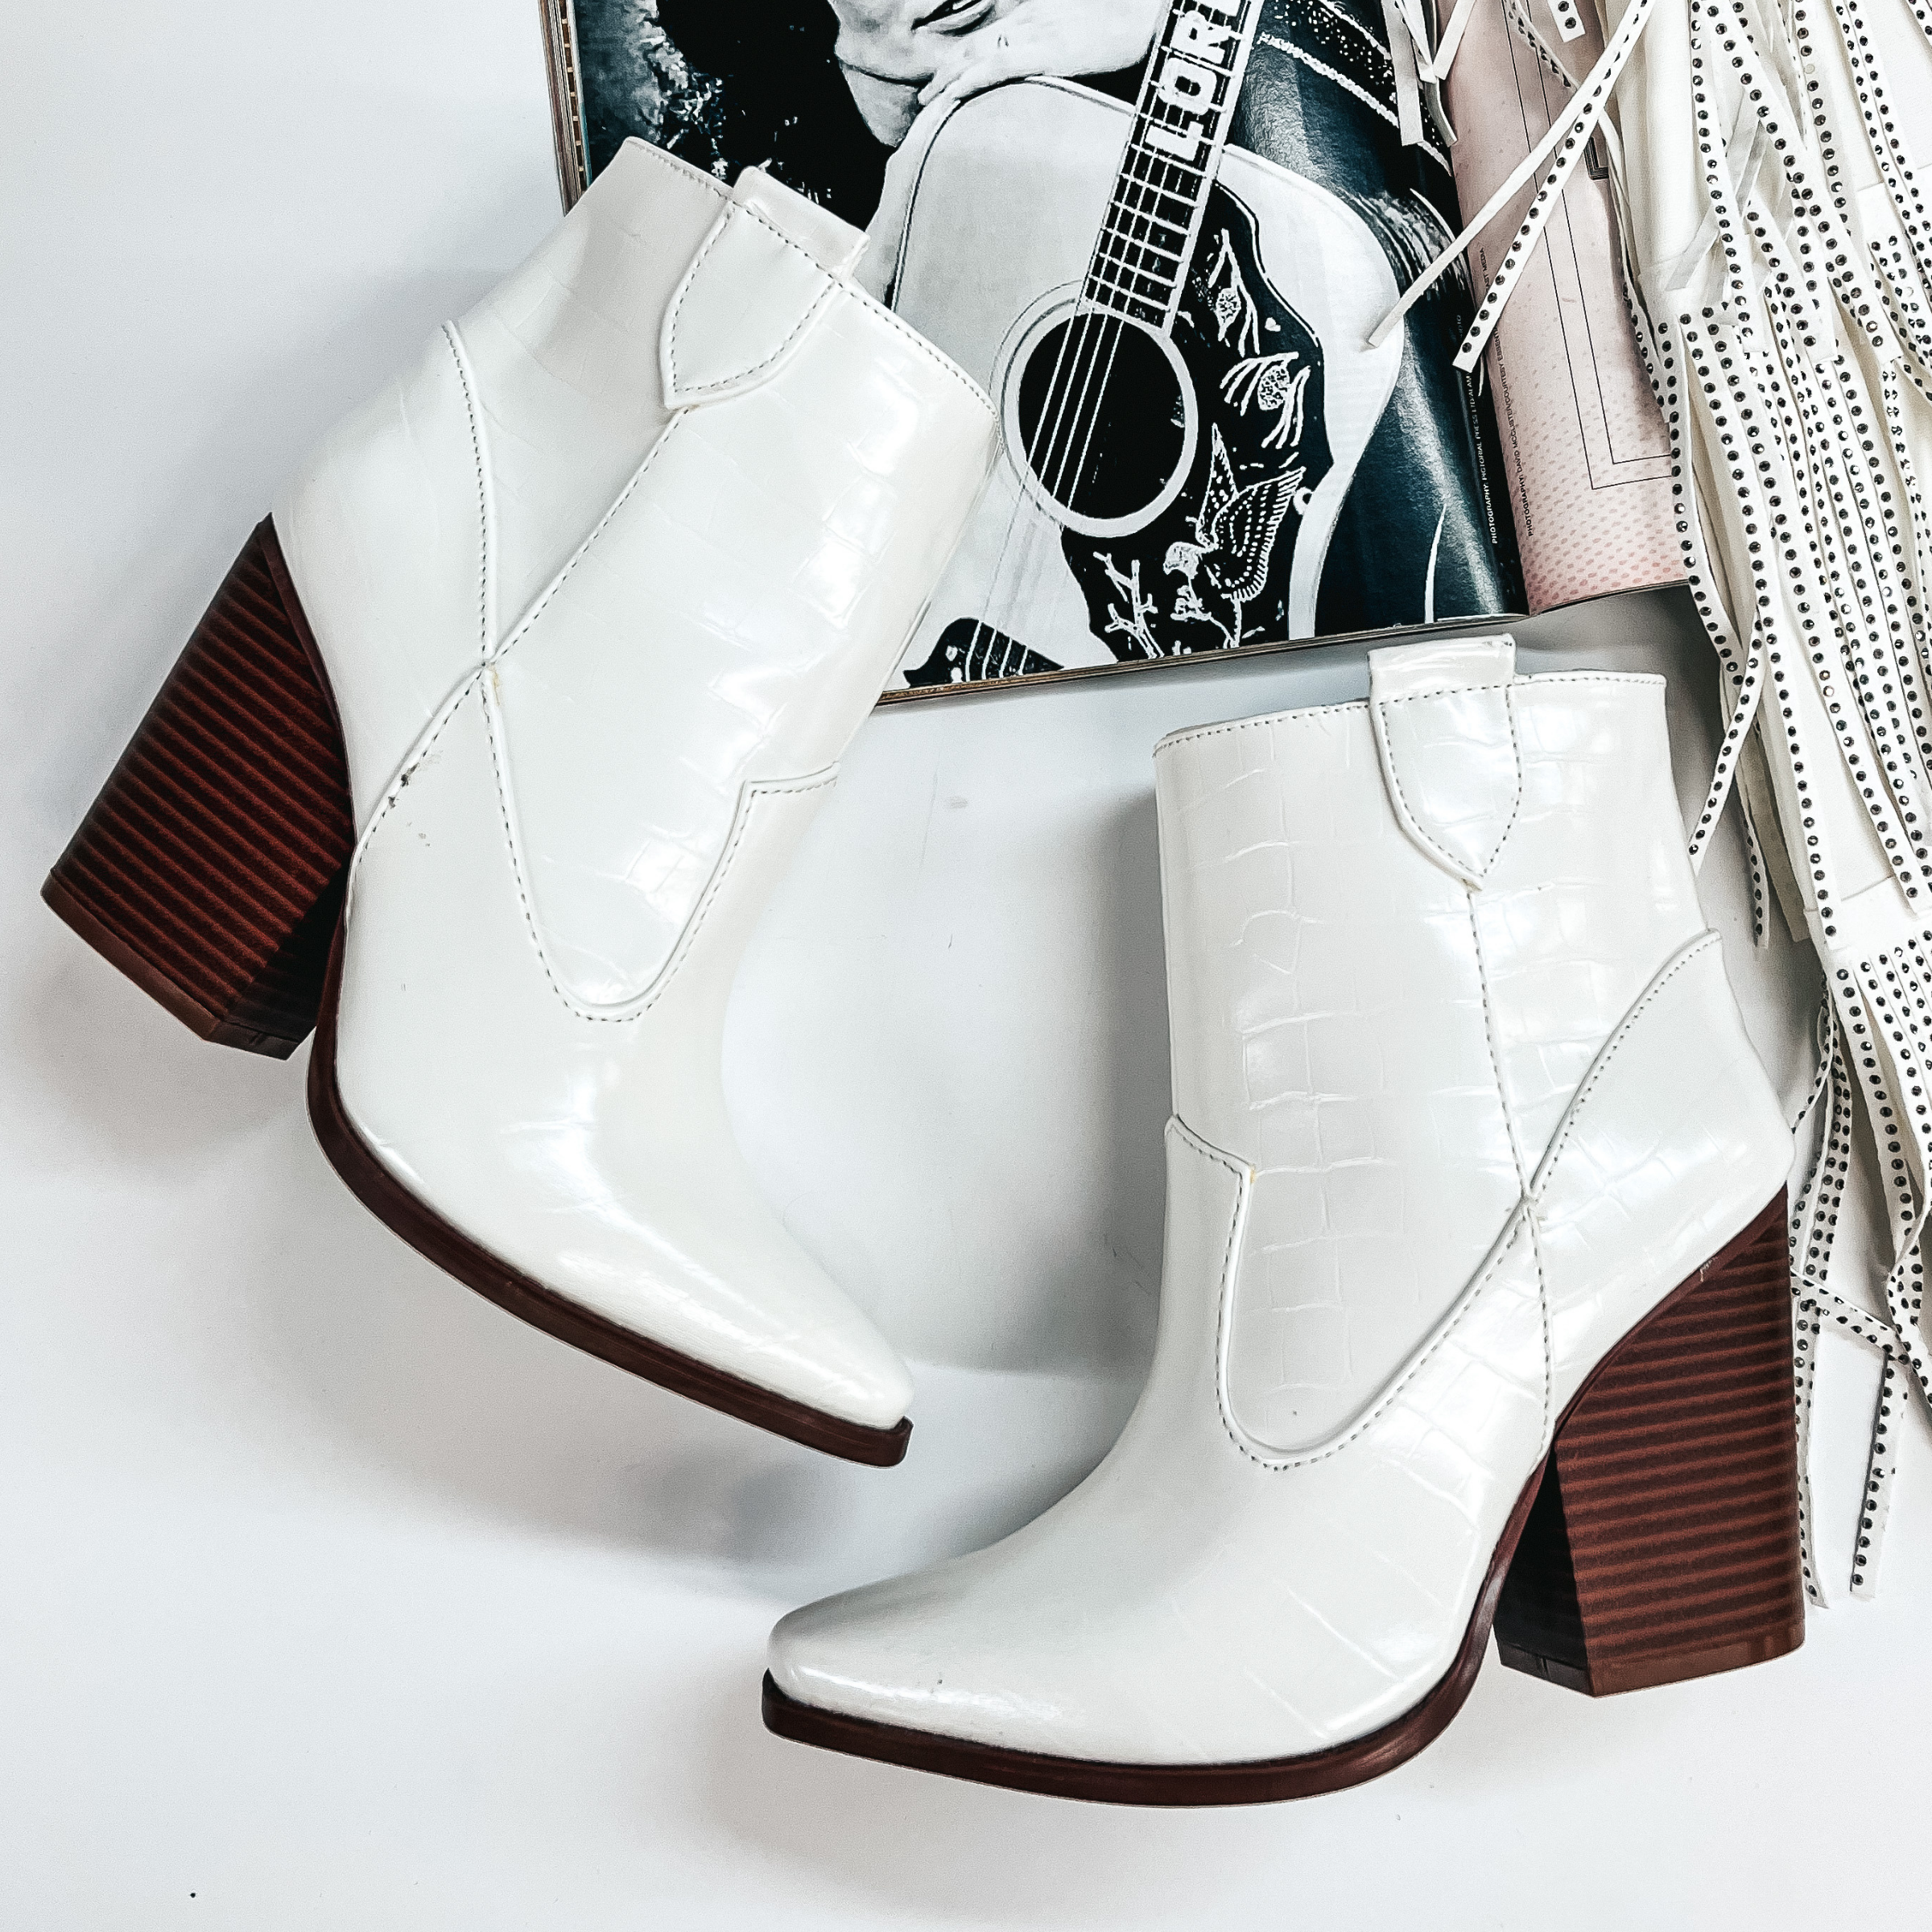 Broadway Strut Crocodile Print Heeled Ankle Booties in White - Giddy Up Glamour Boutique